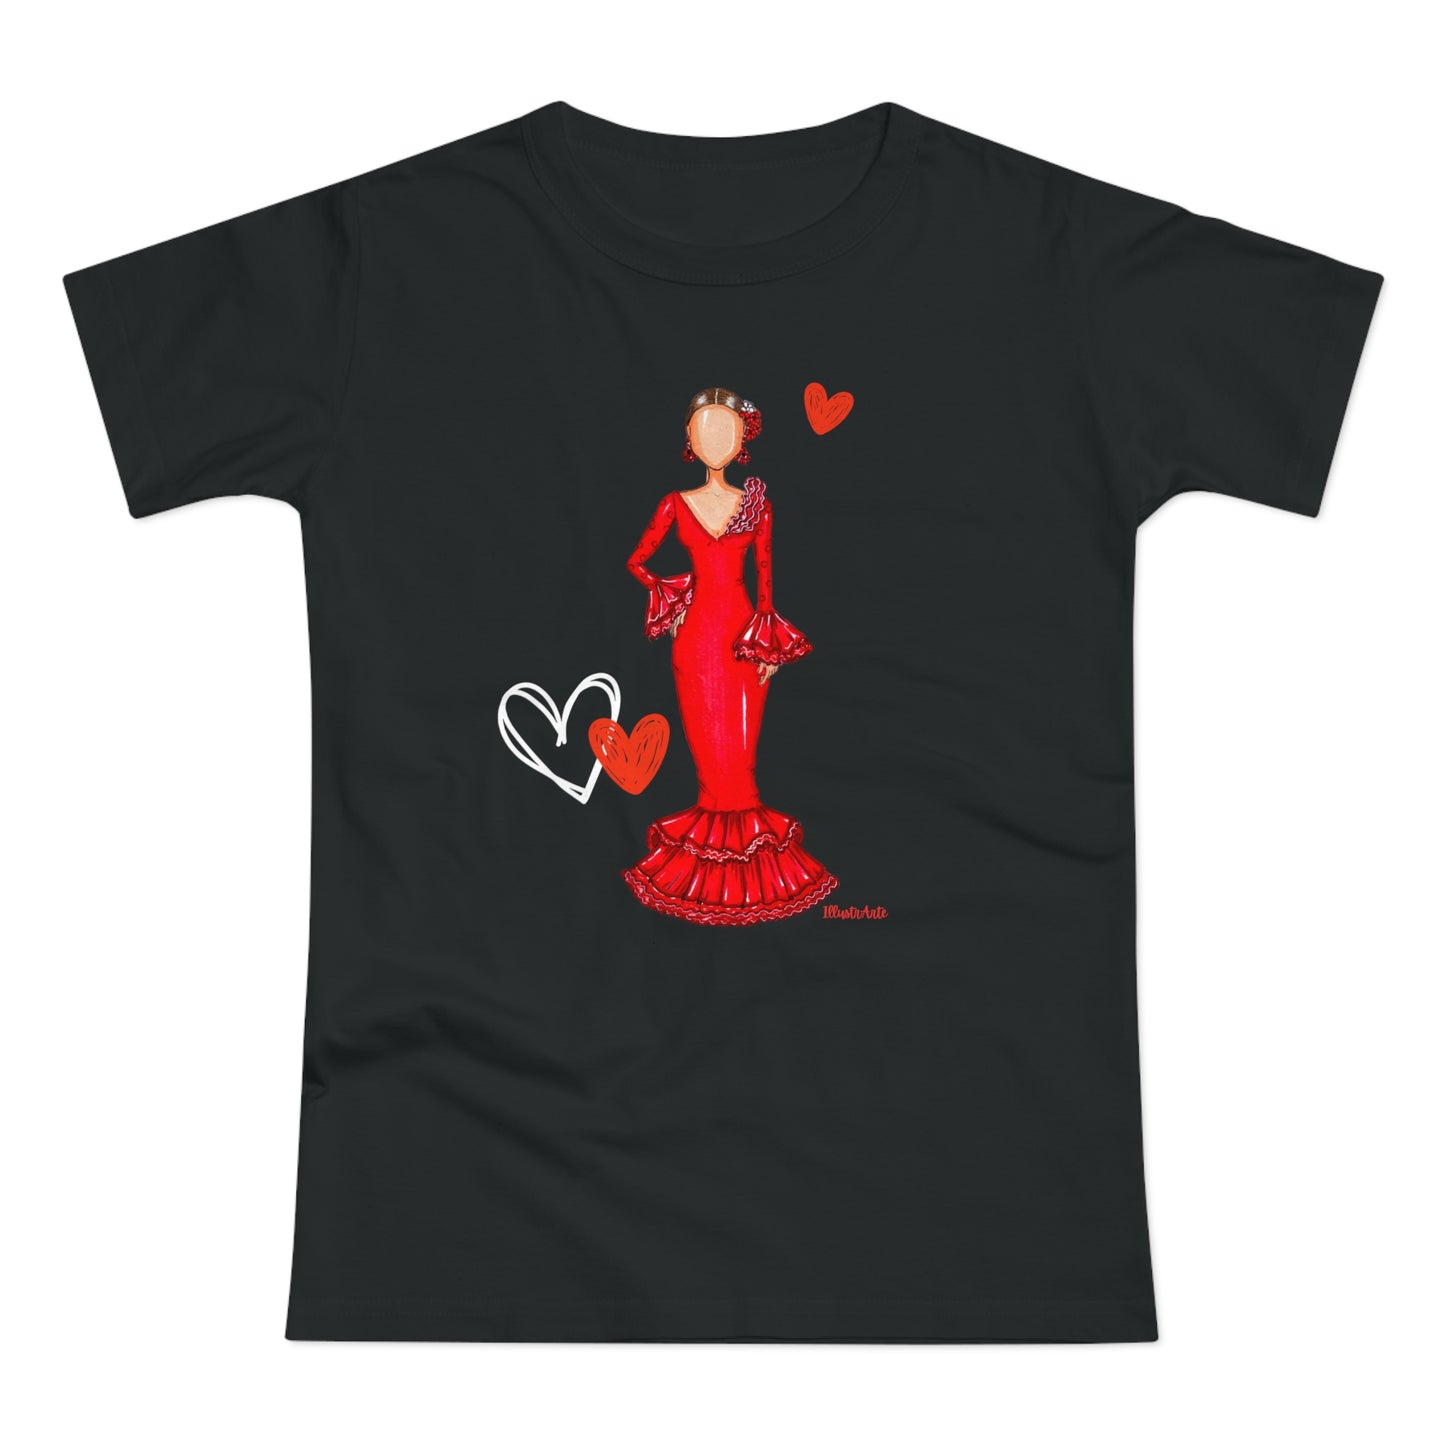 a black t - shirt with a woman in a red dress